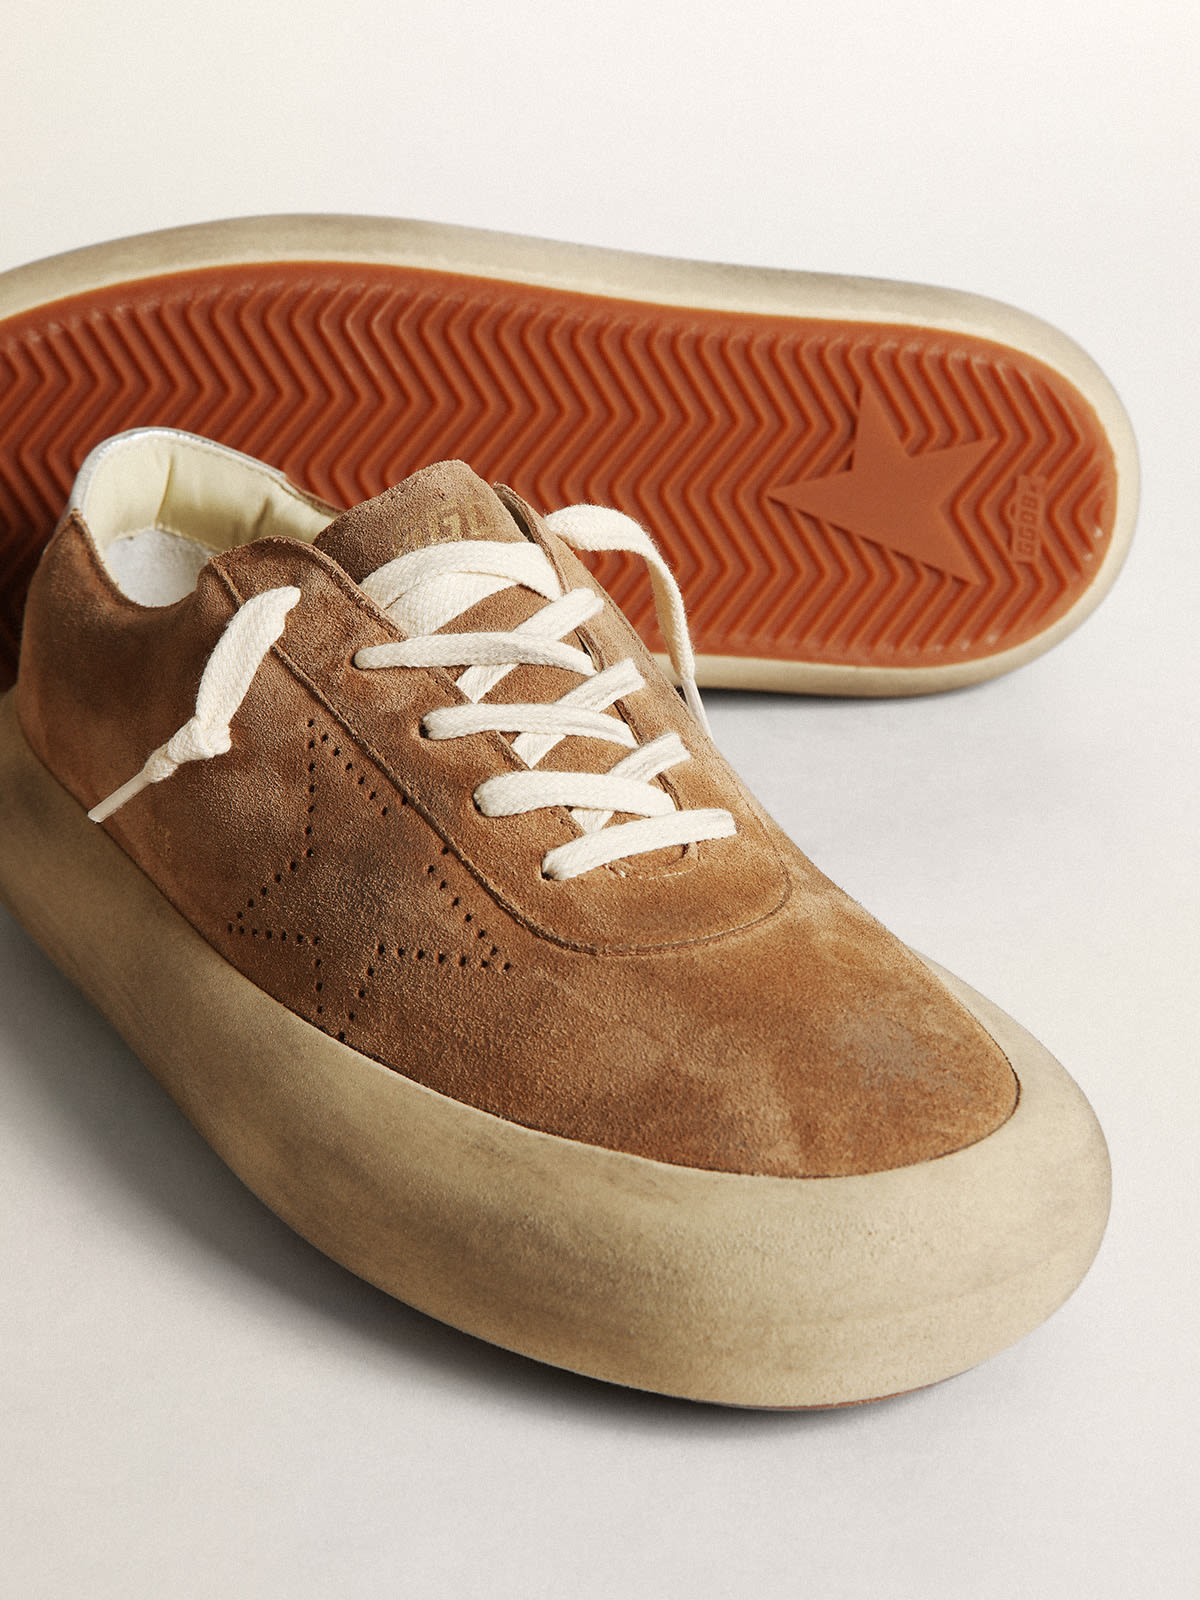 Golden Goose - Men's Space-Star in tobacco-colored suede in 